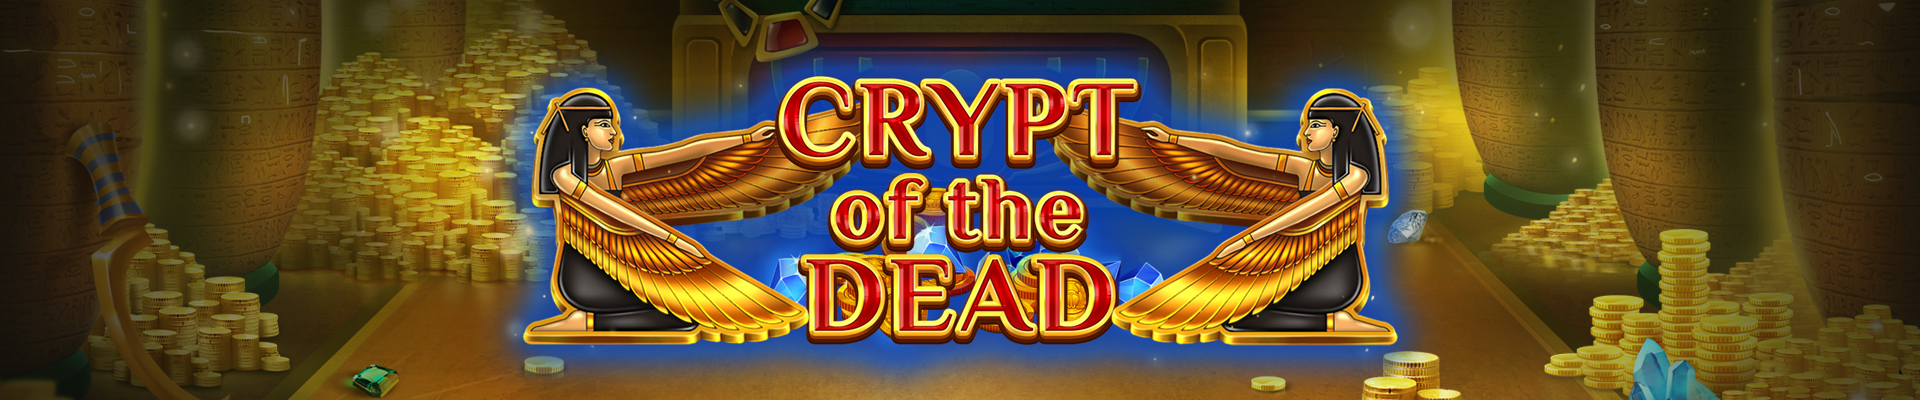 Crypt of the Dead slot cover image